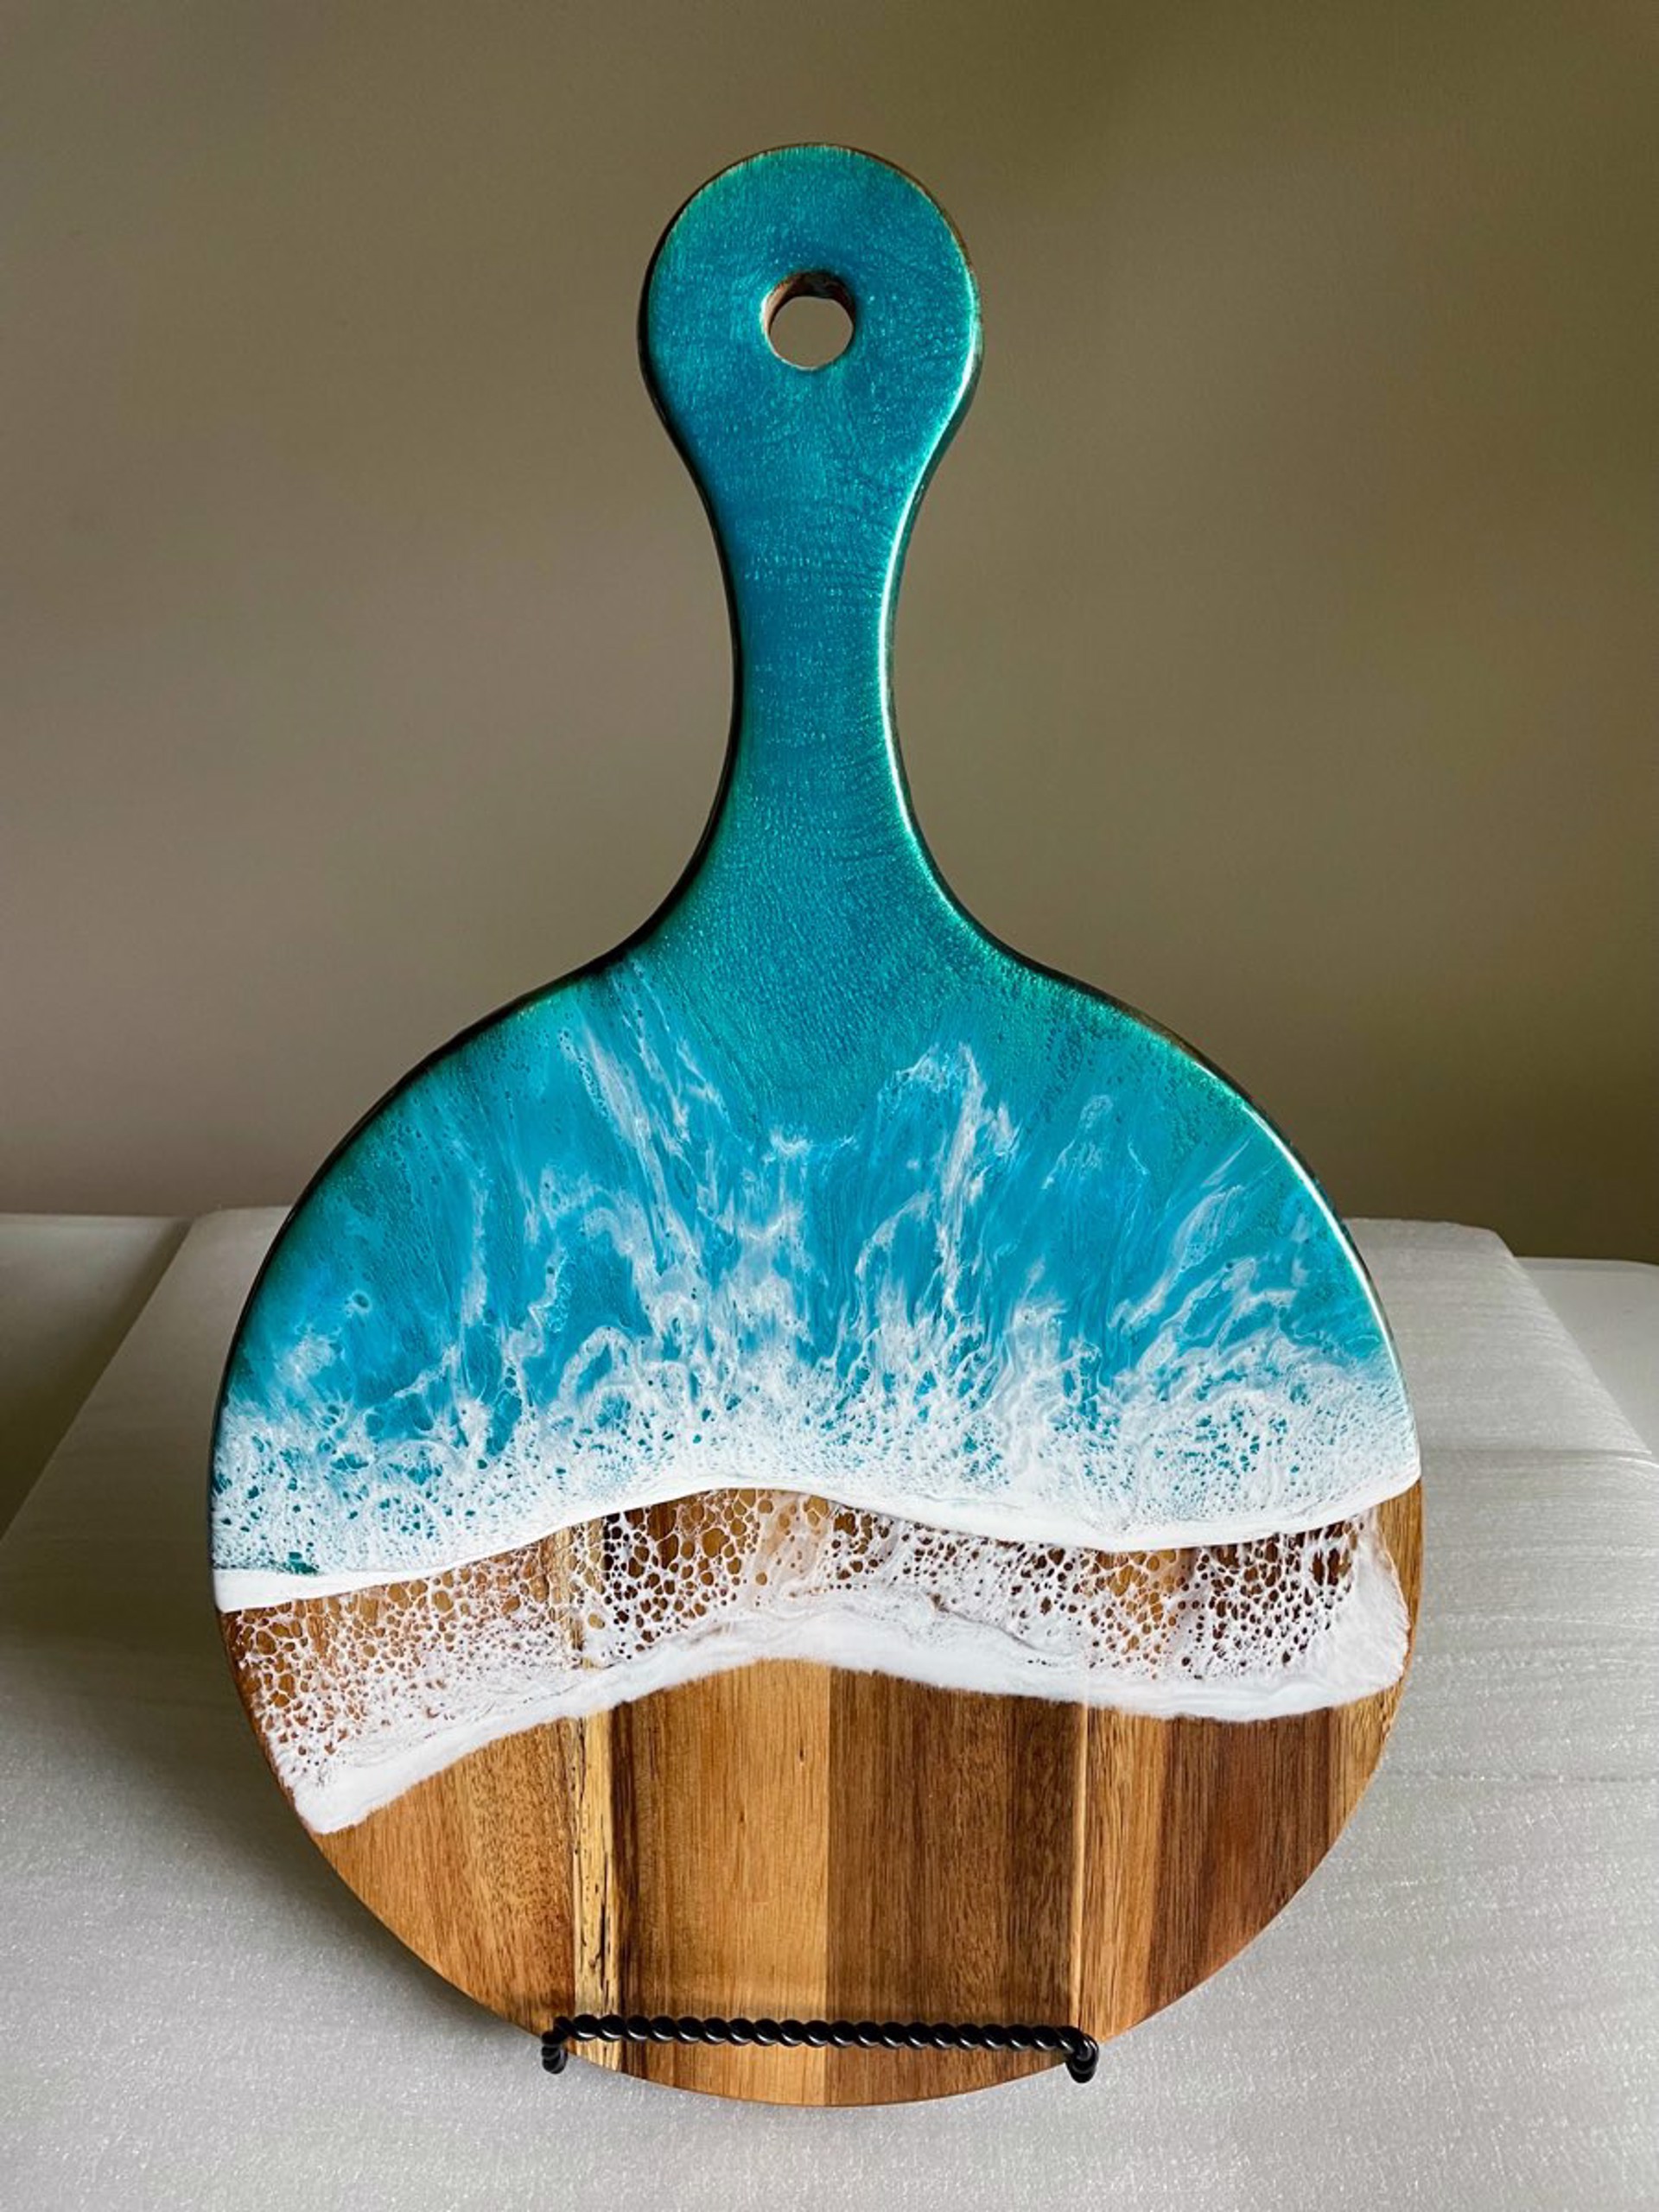 Round Teal Resin and Wood Charcuterie Board MDM22-16 by Mary Duke McCartt